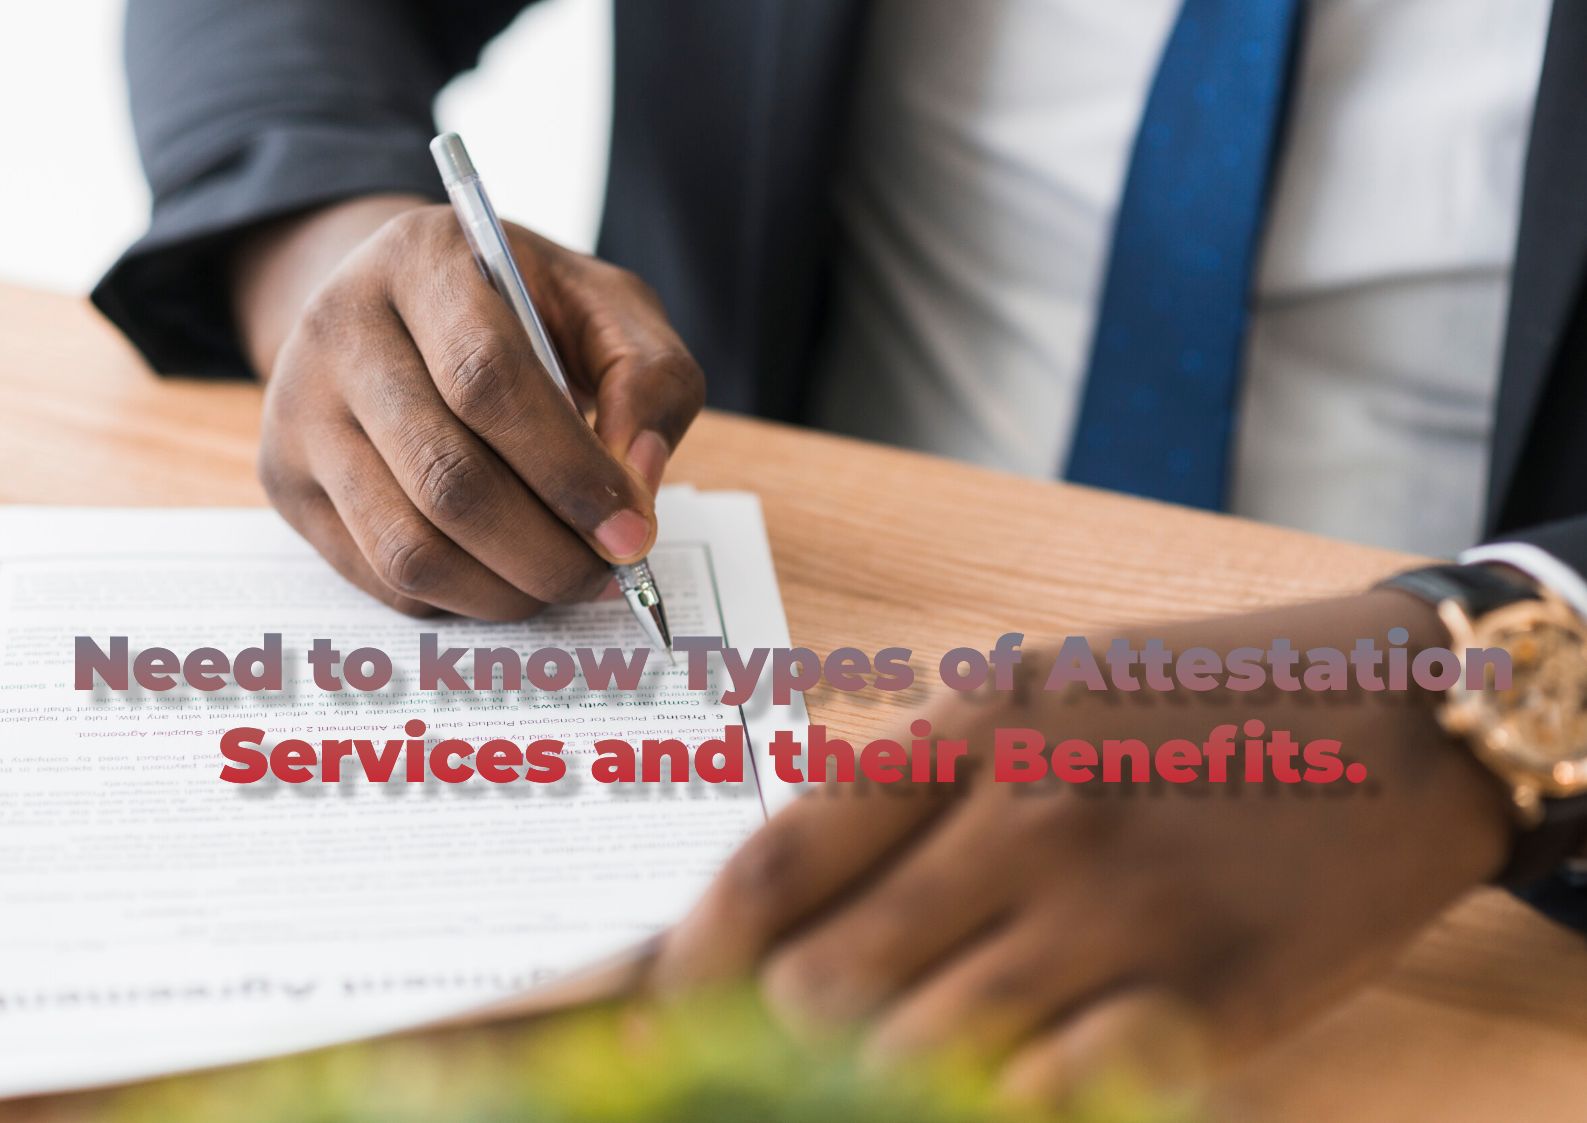 Need to know Types of Attestation Services and their Benefits.